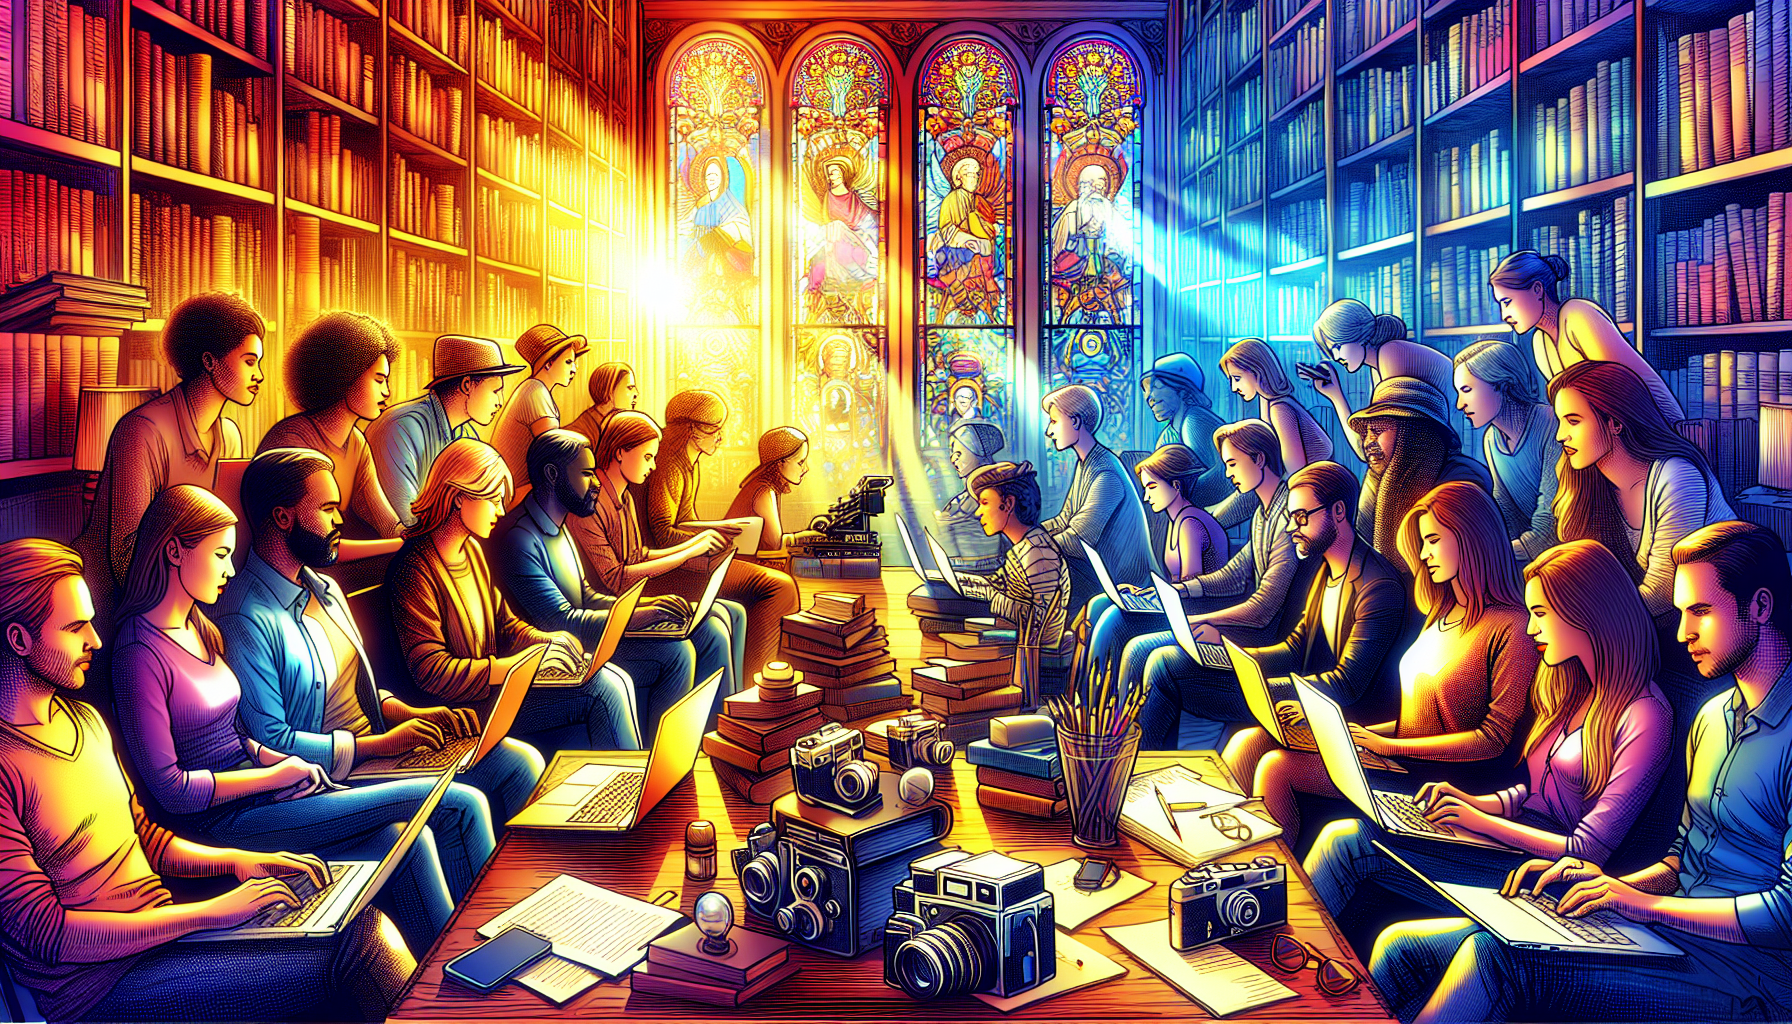 An image of a diverse group of aspiring screenwriters sitting in an old, cozy library filled with books about famous historical figures. Each writer is deeply engrossed in their laptop, surrounded by